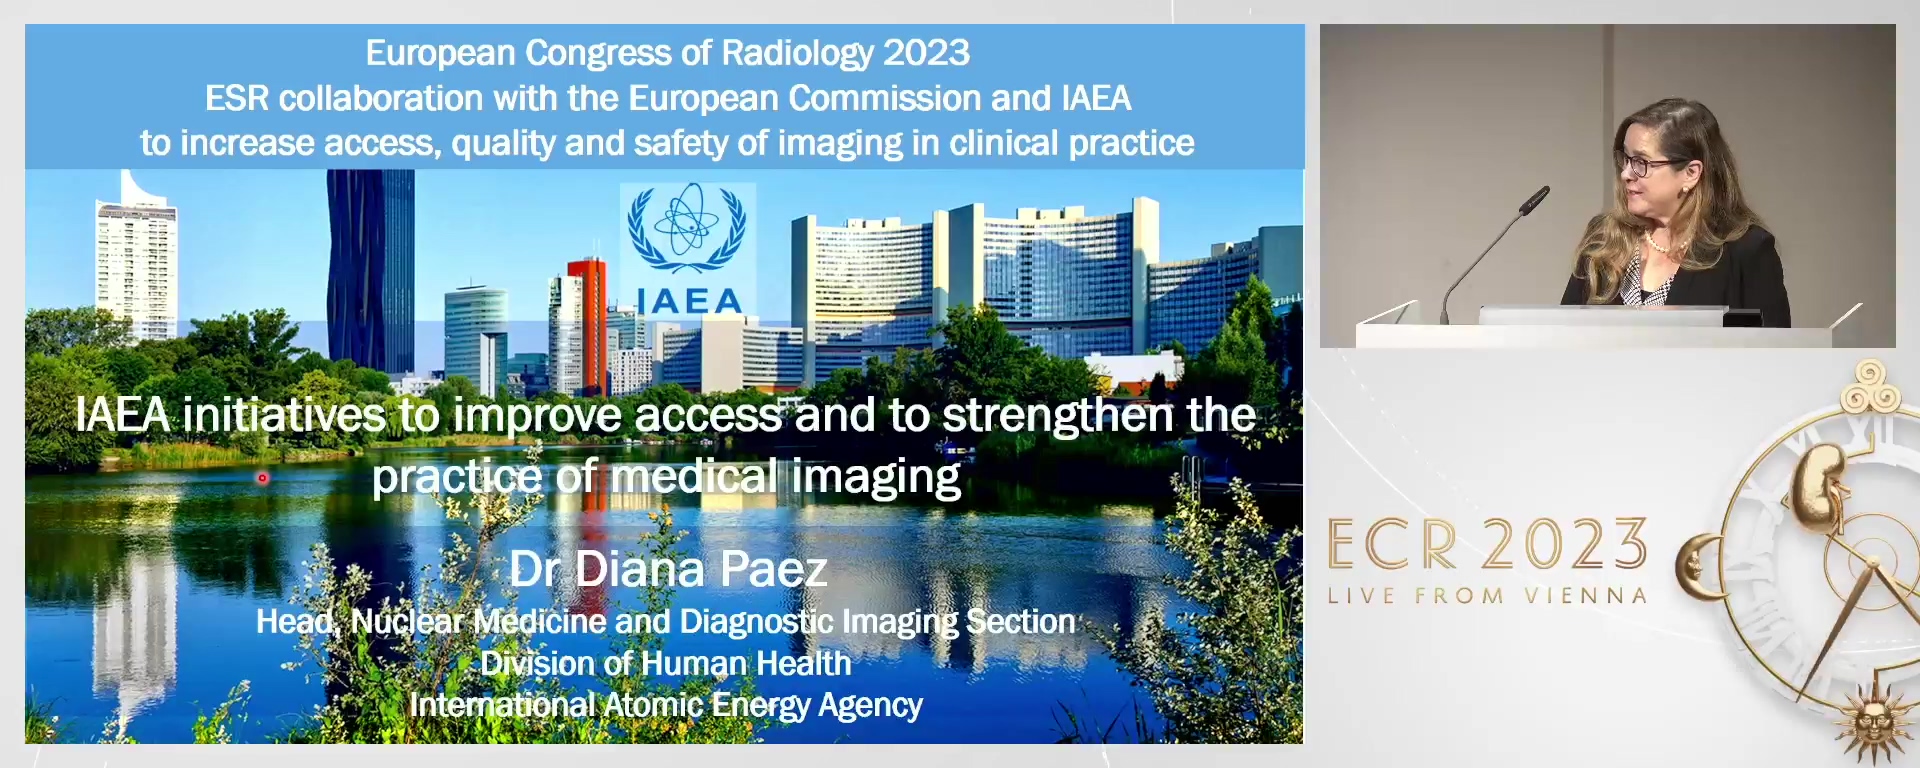 IAEA initiatives to improve access and to strengthen the practice of medical imaging